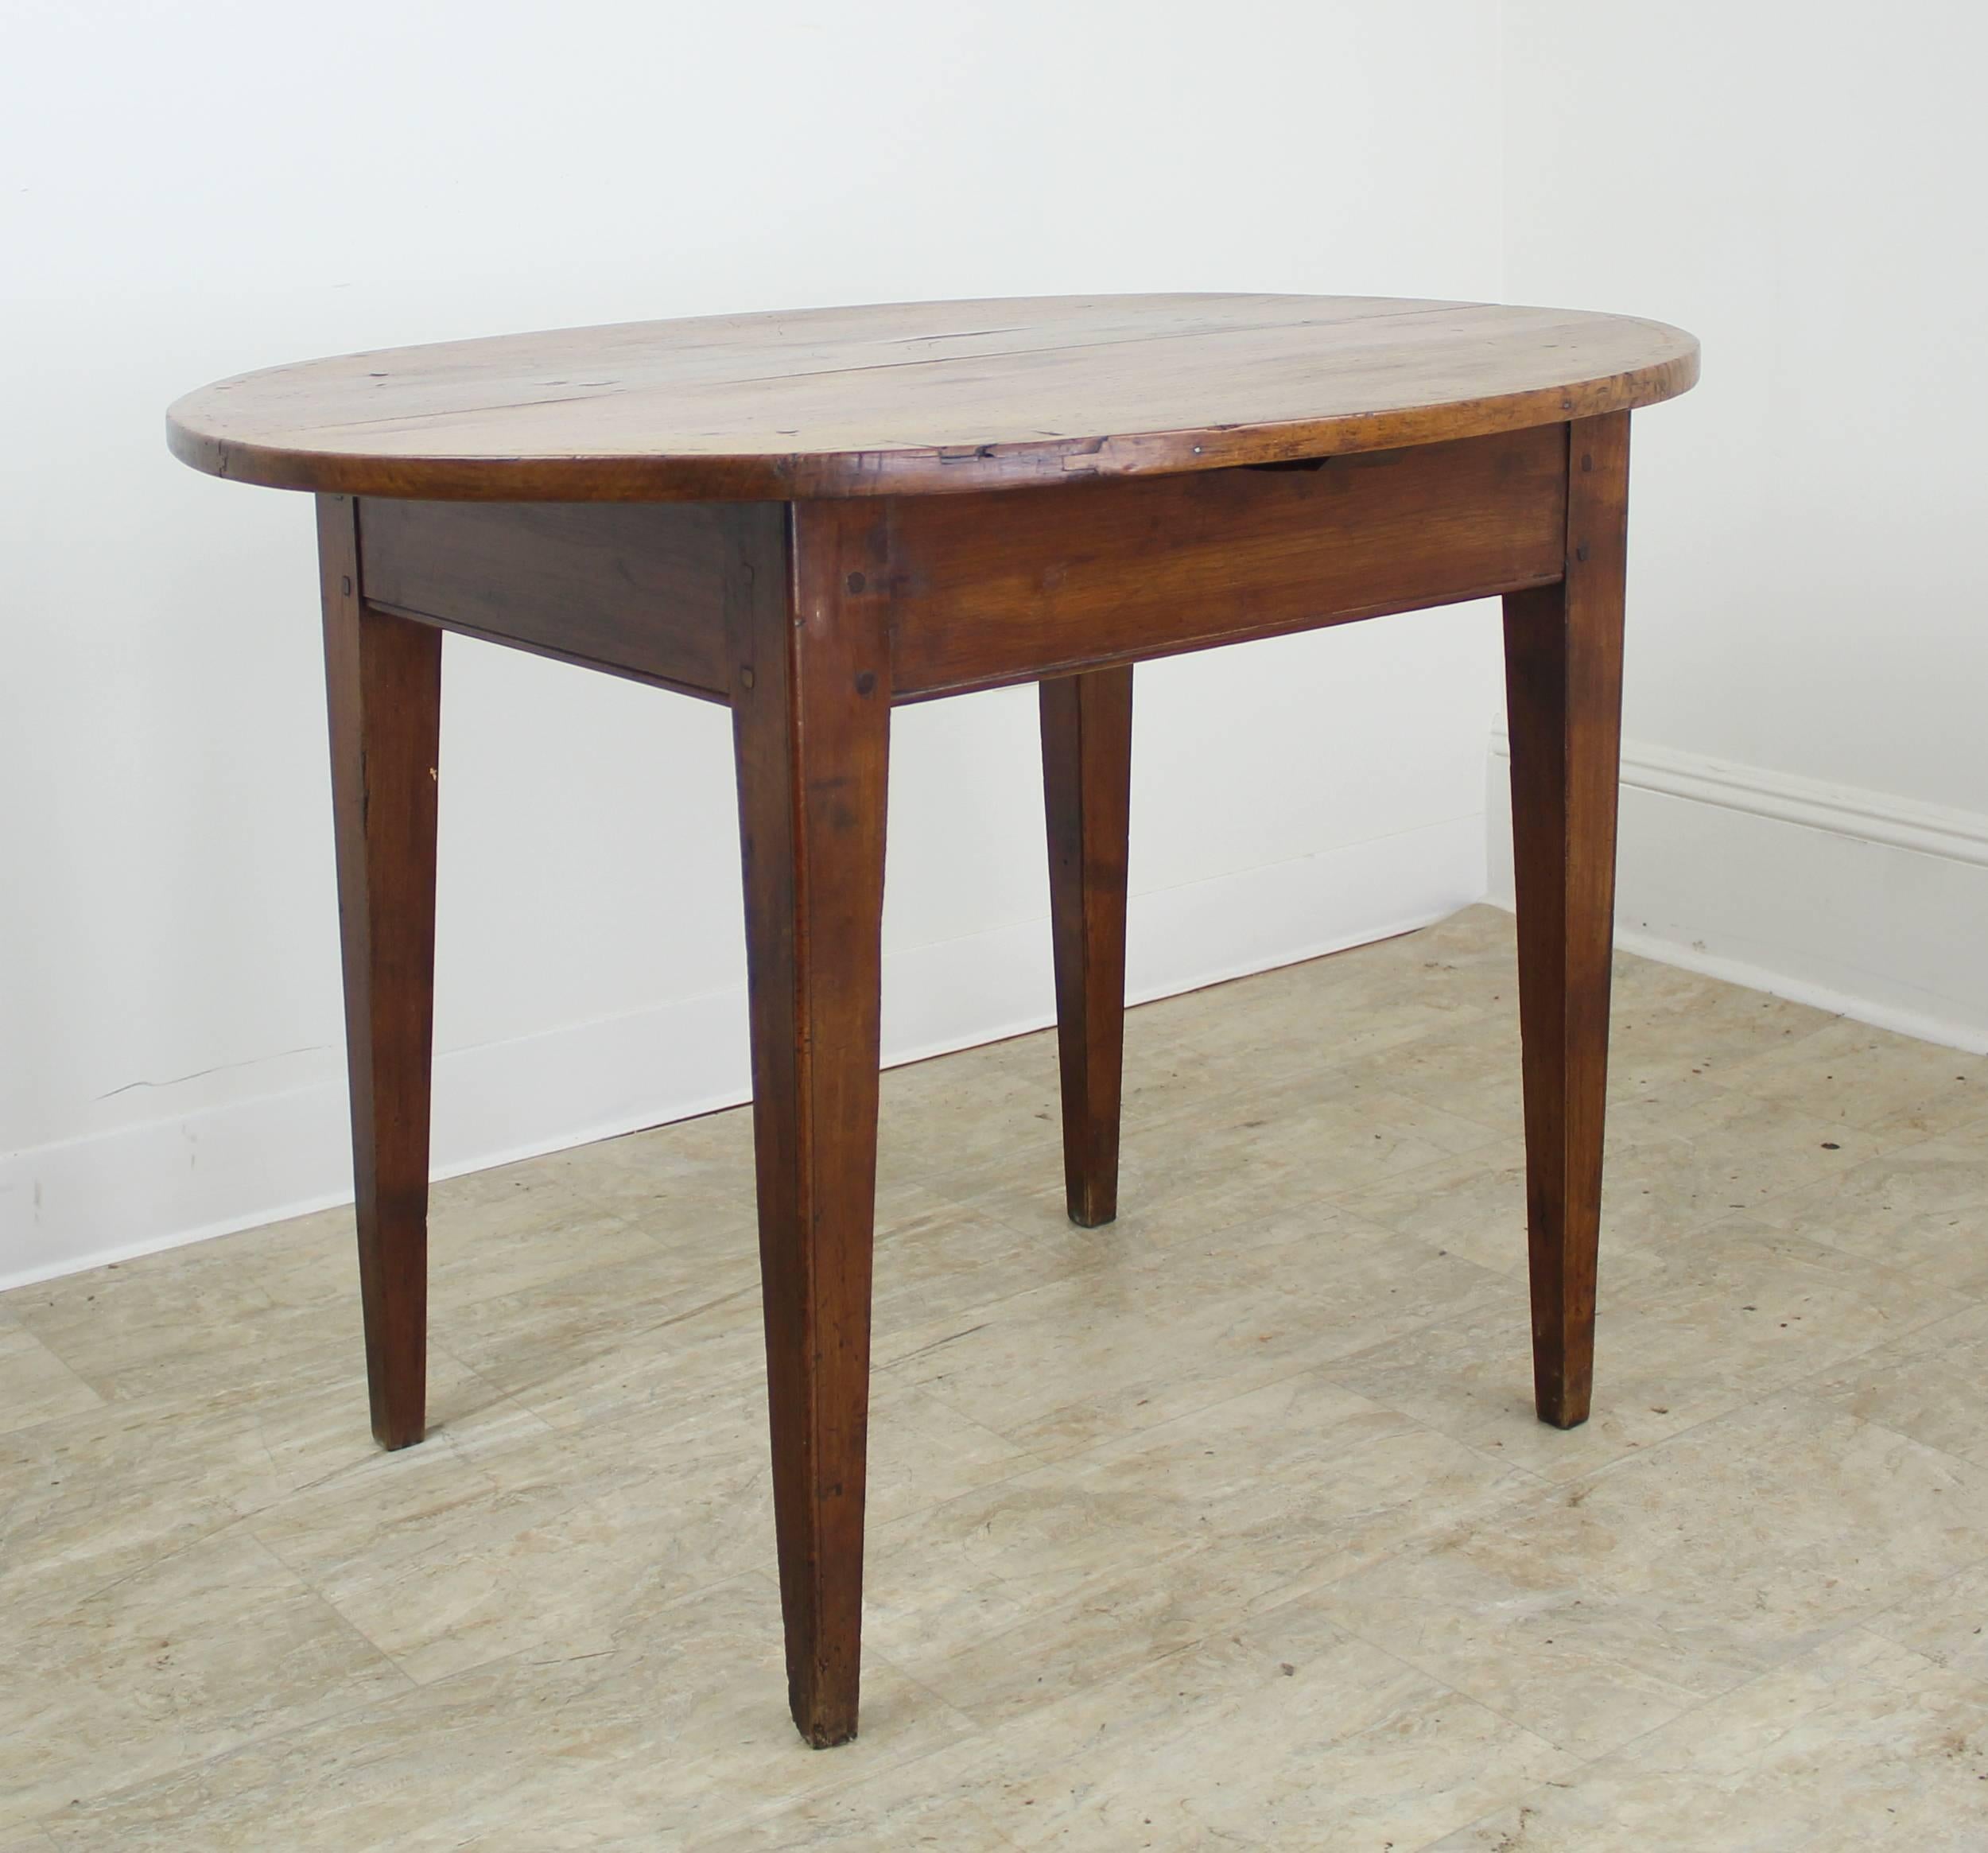 A charming occasional, lamp or end table in warm cherry with elegant tapered legs. Legs are nicely pegged at the apron and the top has wonderful color and patina. There is a small patched area on the top.